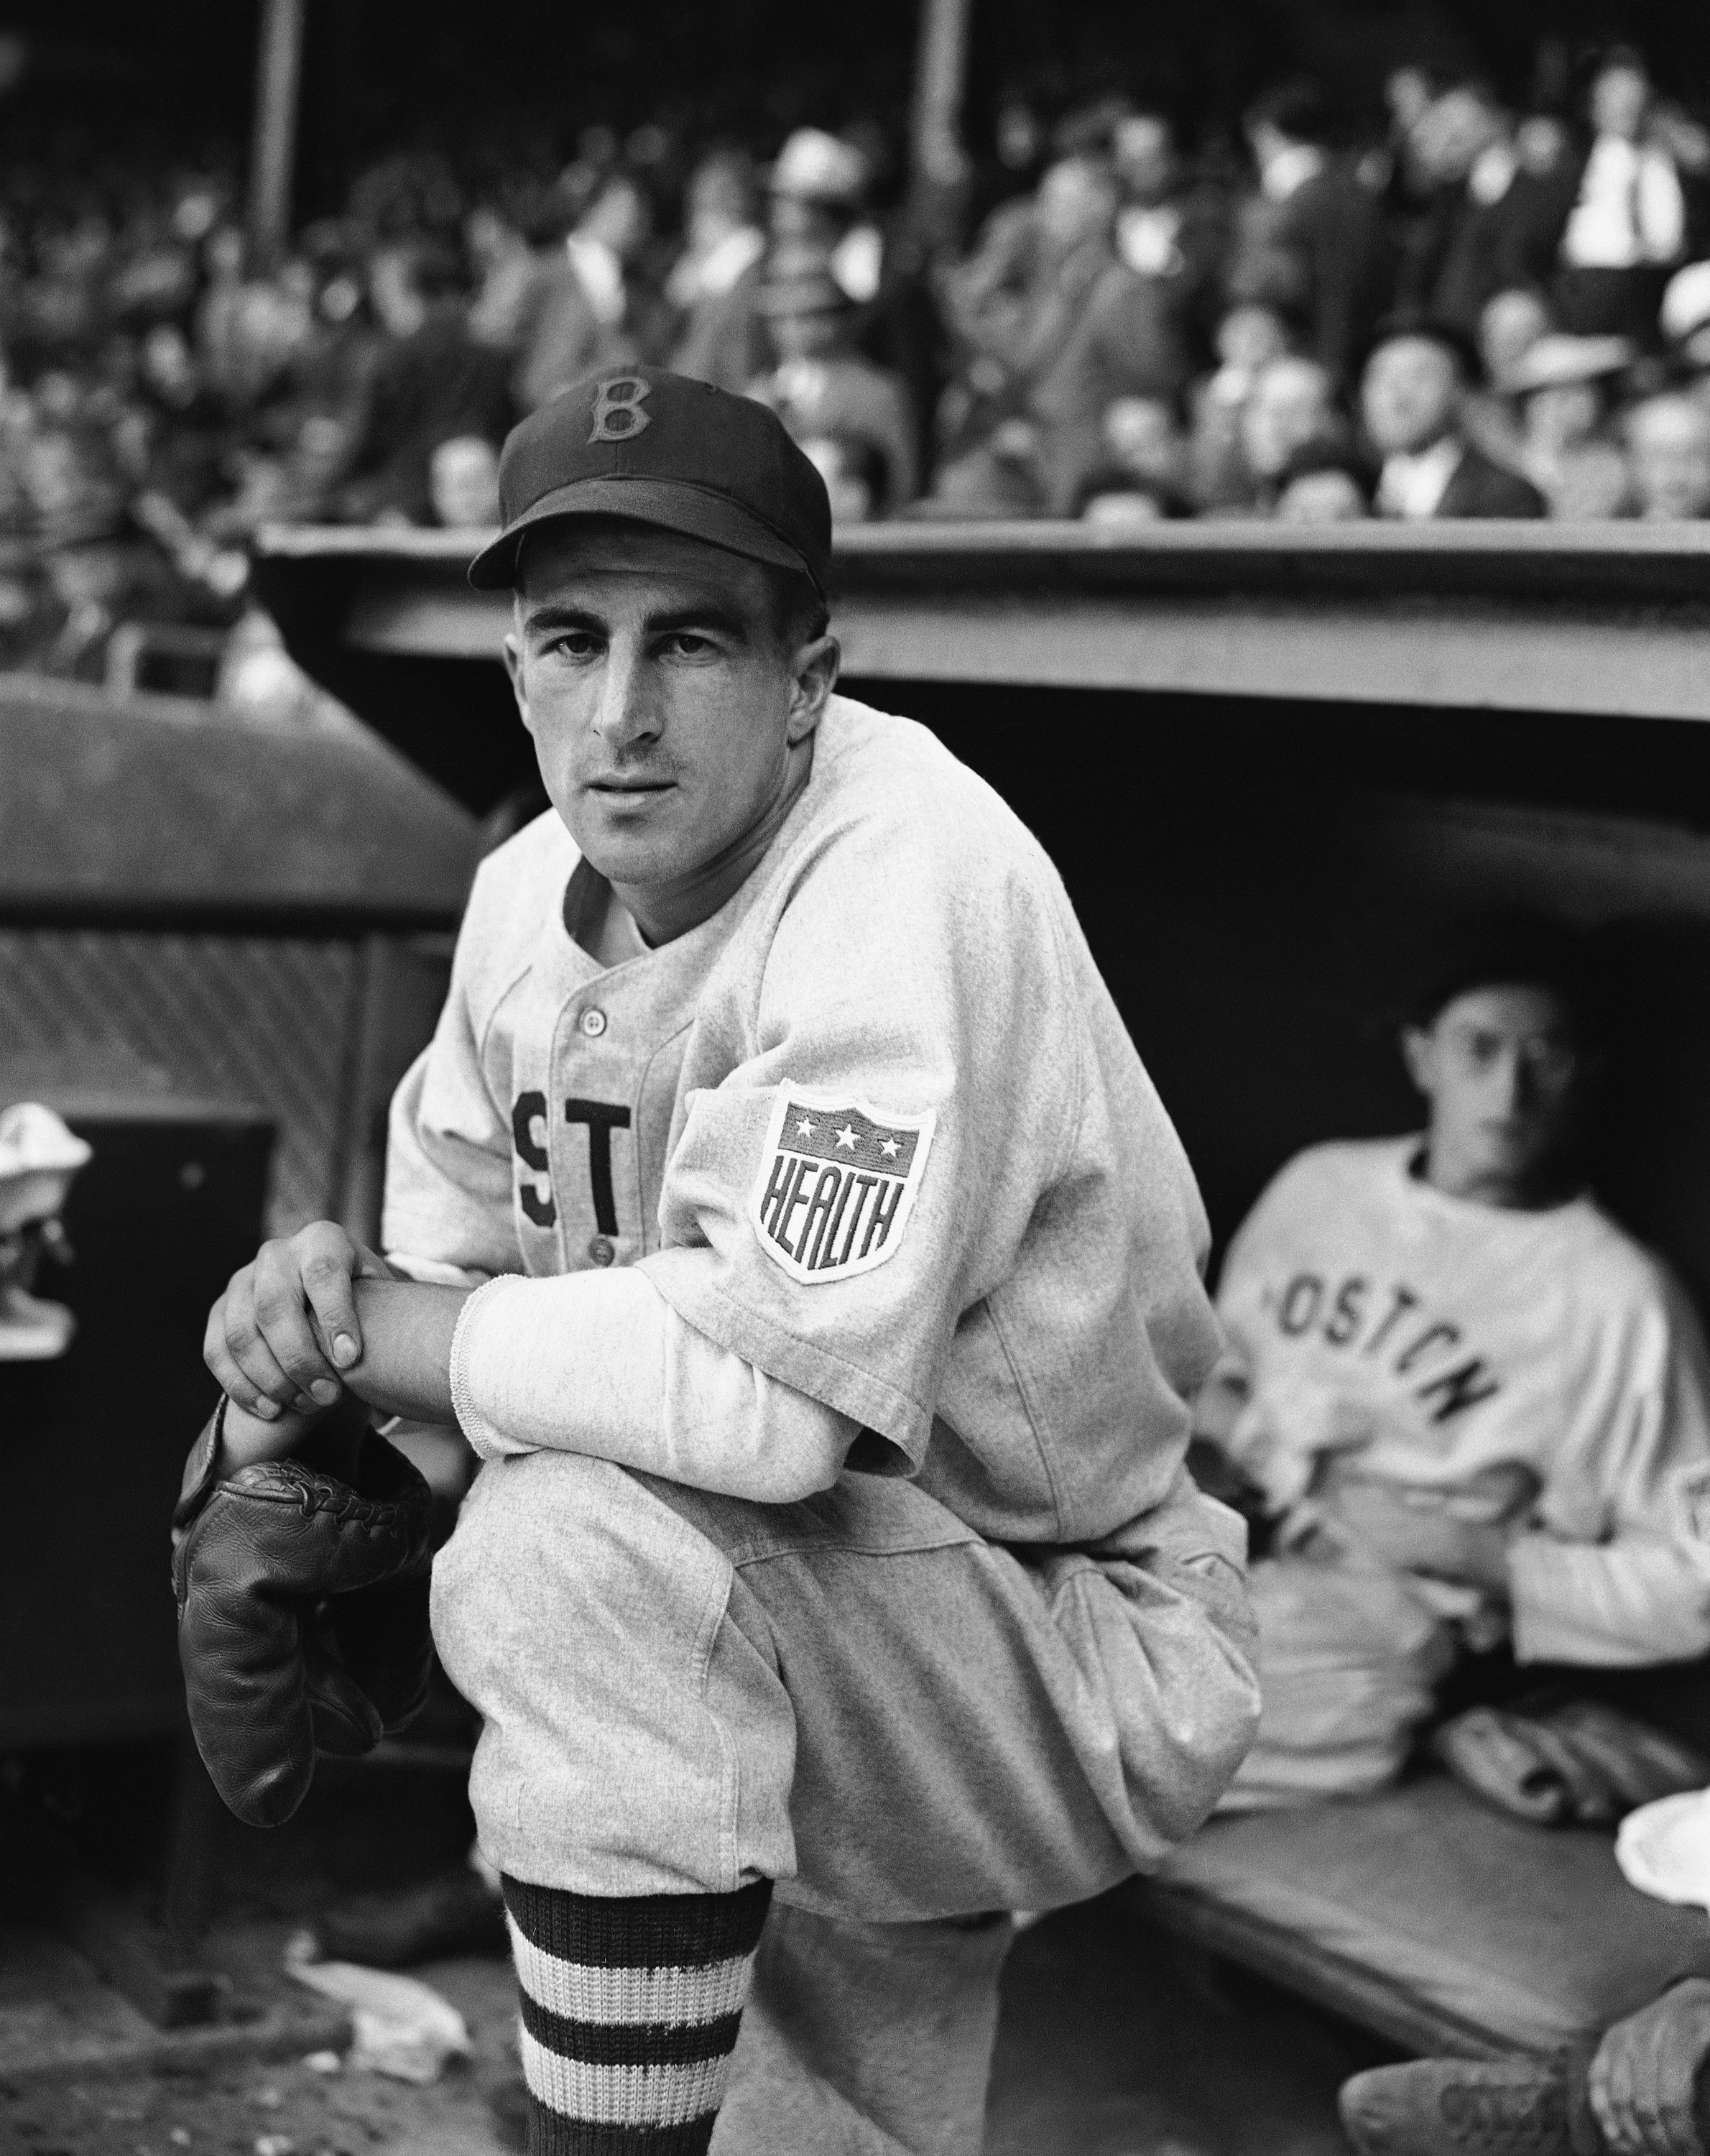 John Pesky, - John Pesky, Boston Red Sox shown Sept. 2, 1942, probably covers more ground than Stephens and has immeasurably strengthened the Red Sox infield. One of the league?s hitters, Pesky?s batting average is higher than Stephen?s but couldn?t knocked in as many. (AP Photo)